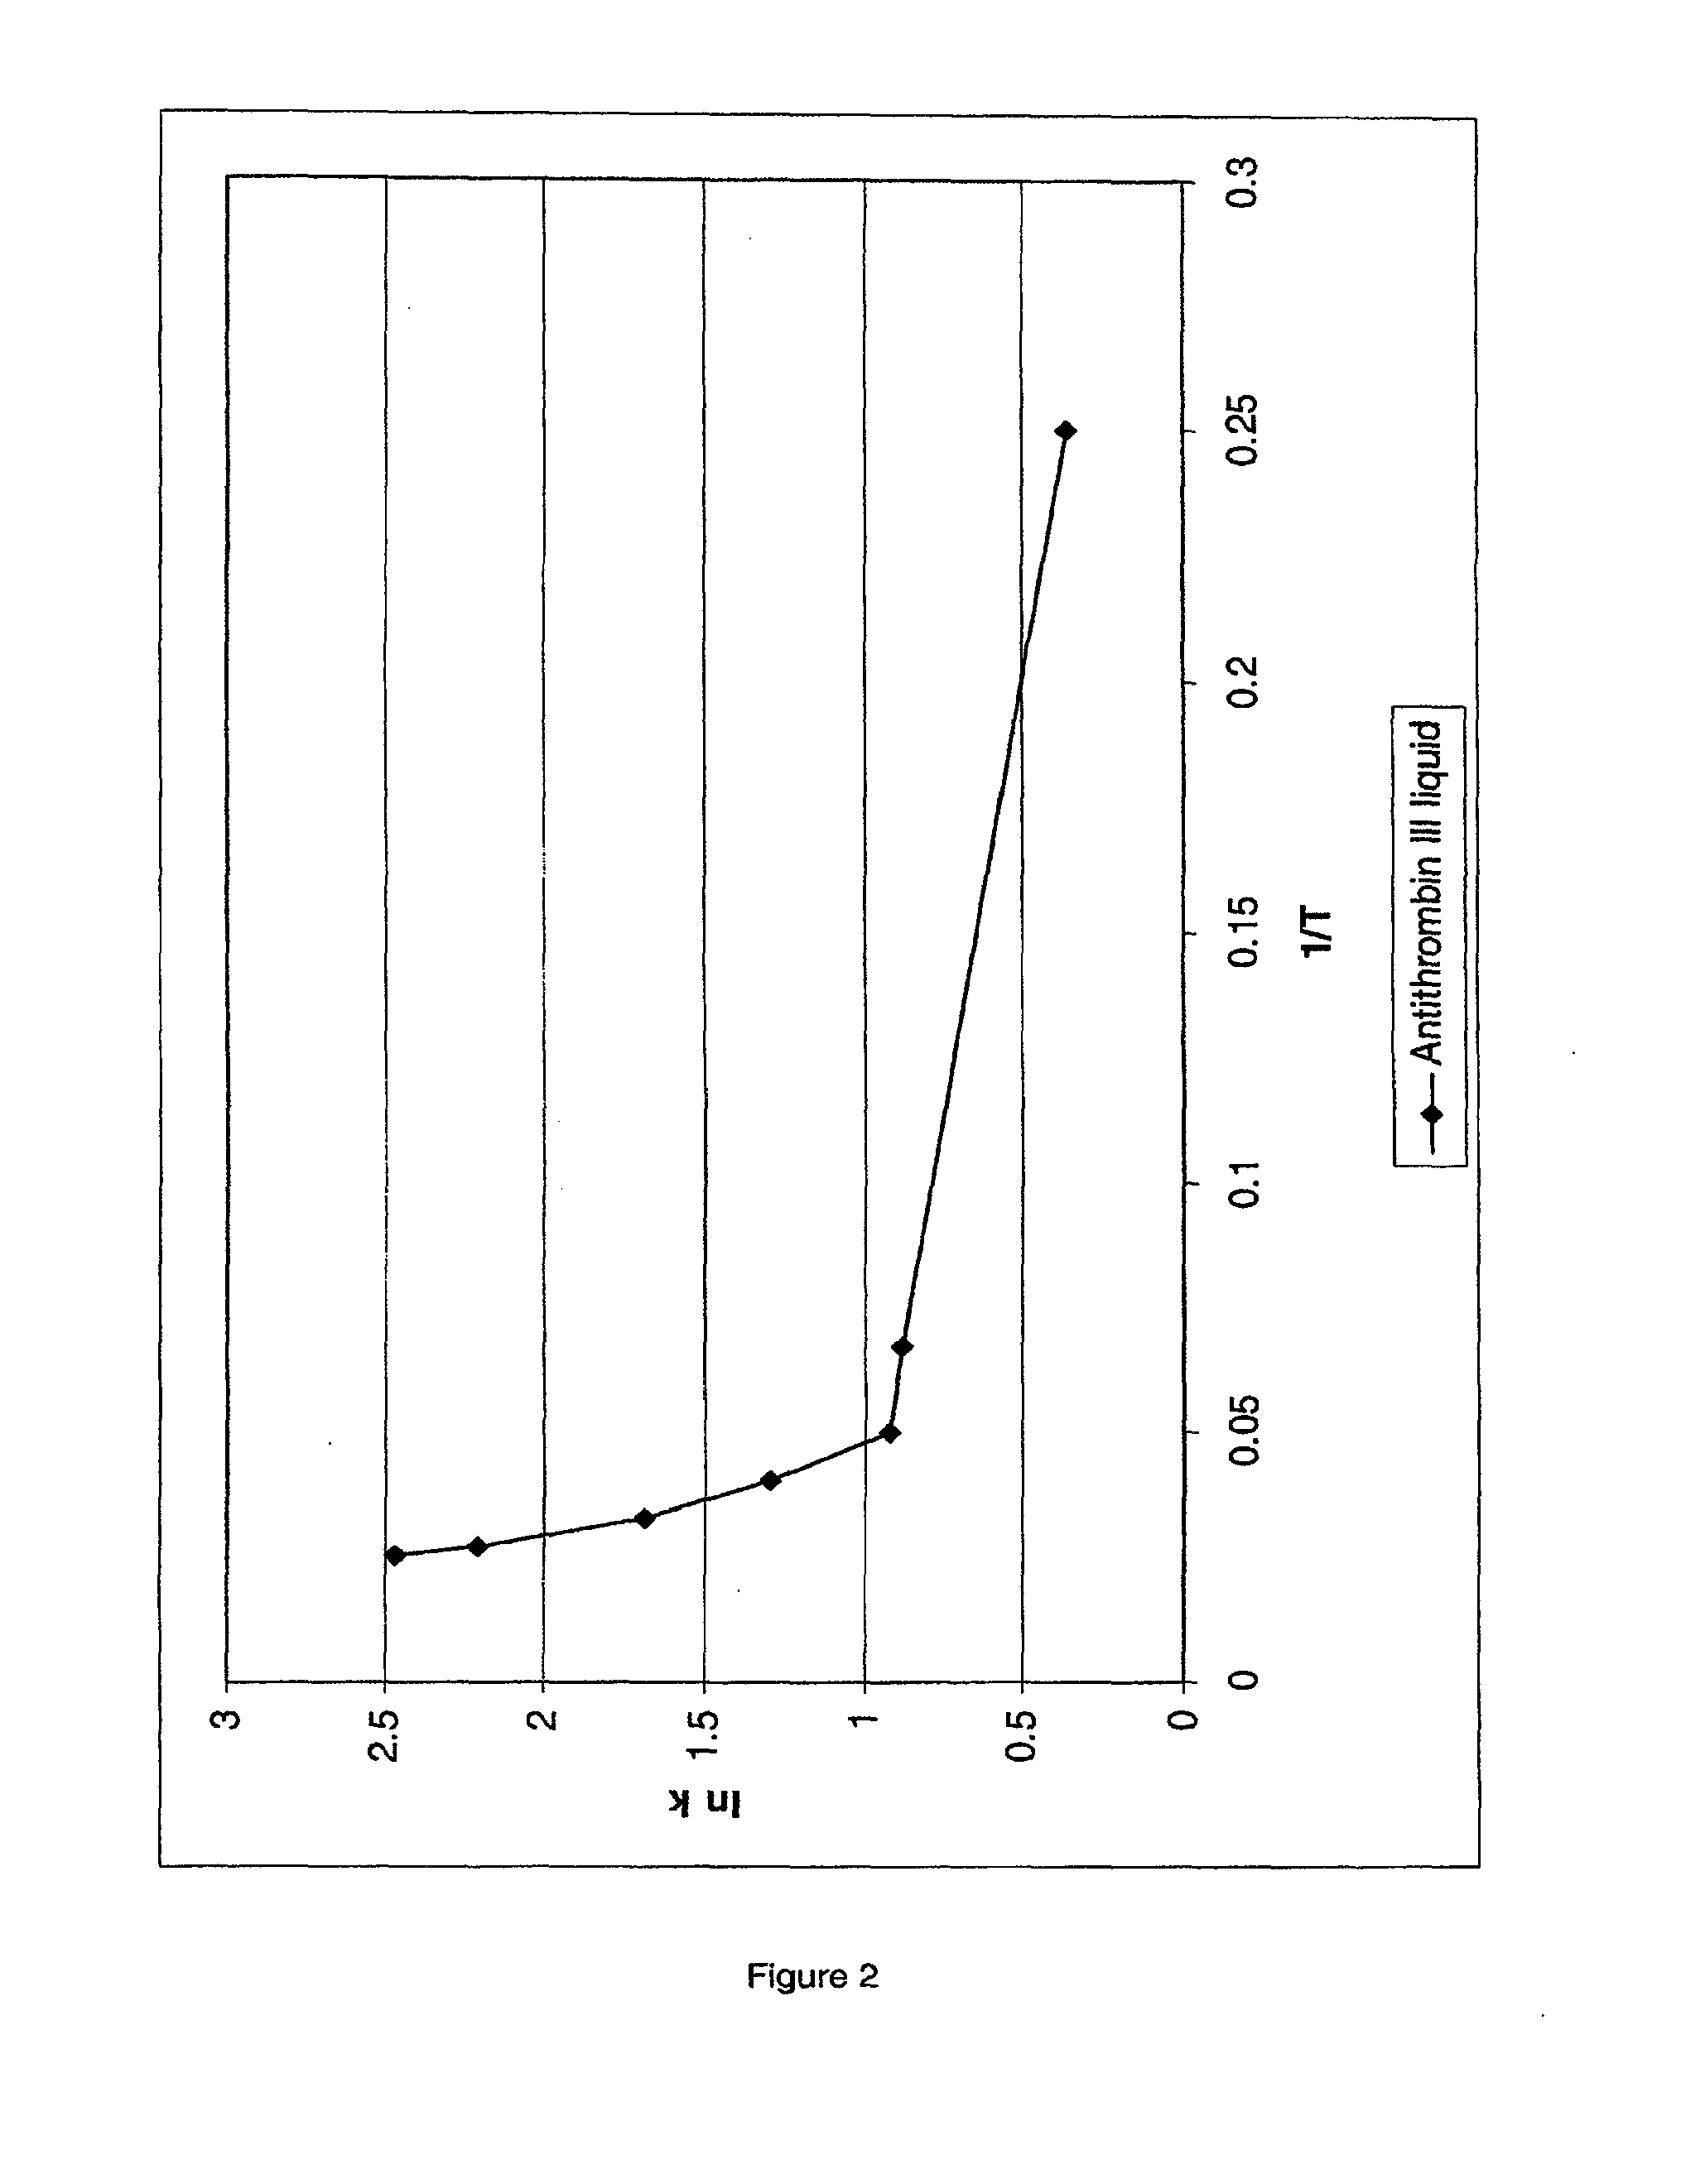 Methods for modeling protein stability